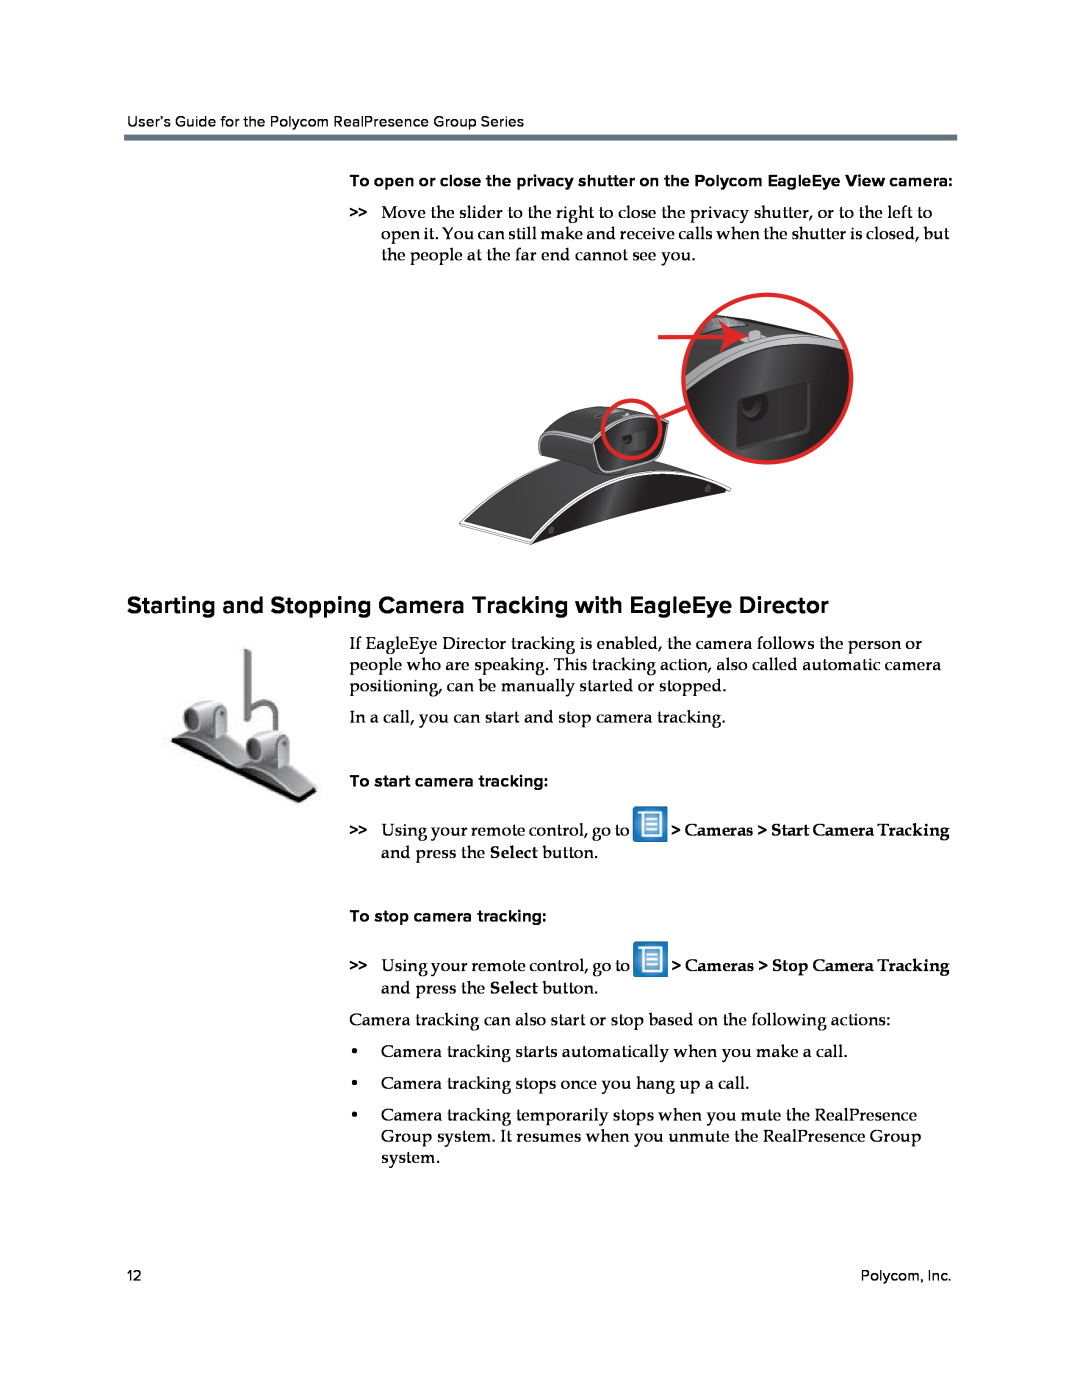 Polycom P001 manual Starting and Stopping Camera Tracking with EagleEye Director, To start camera tracking 